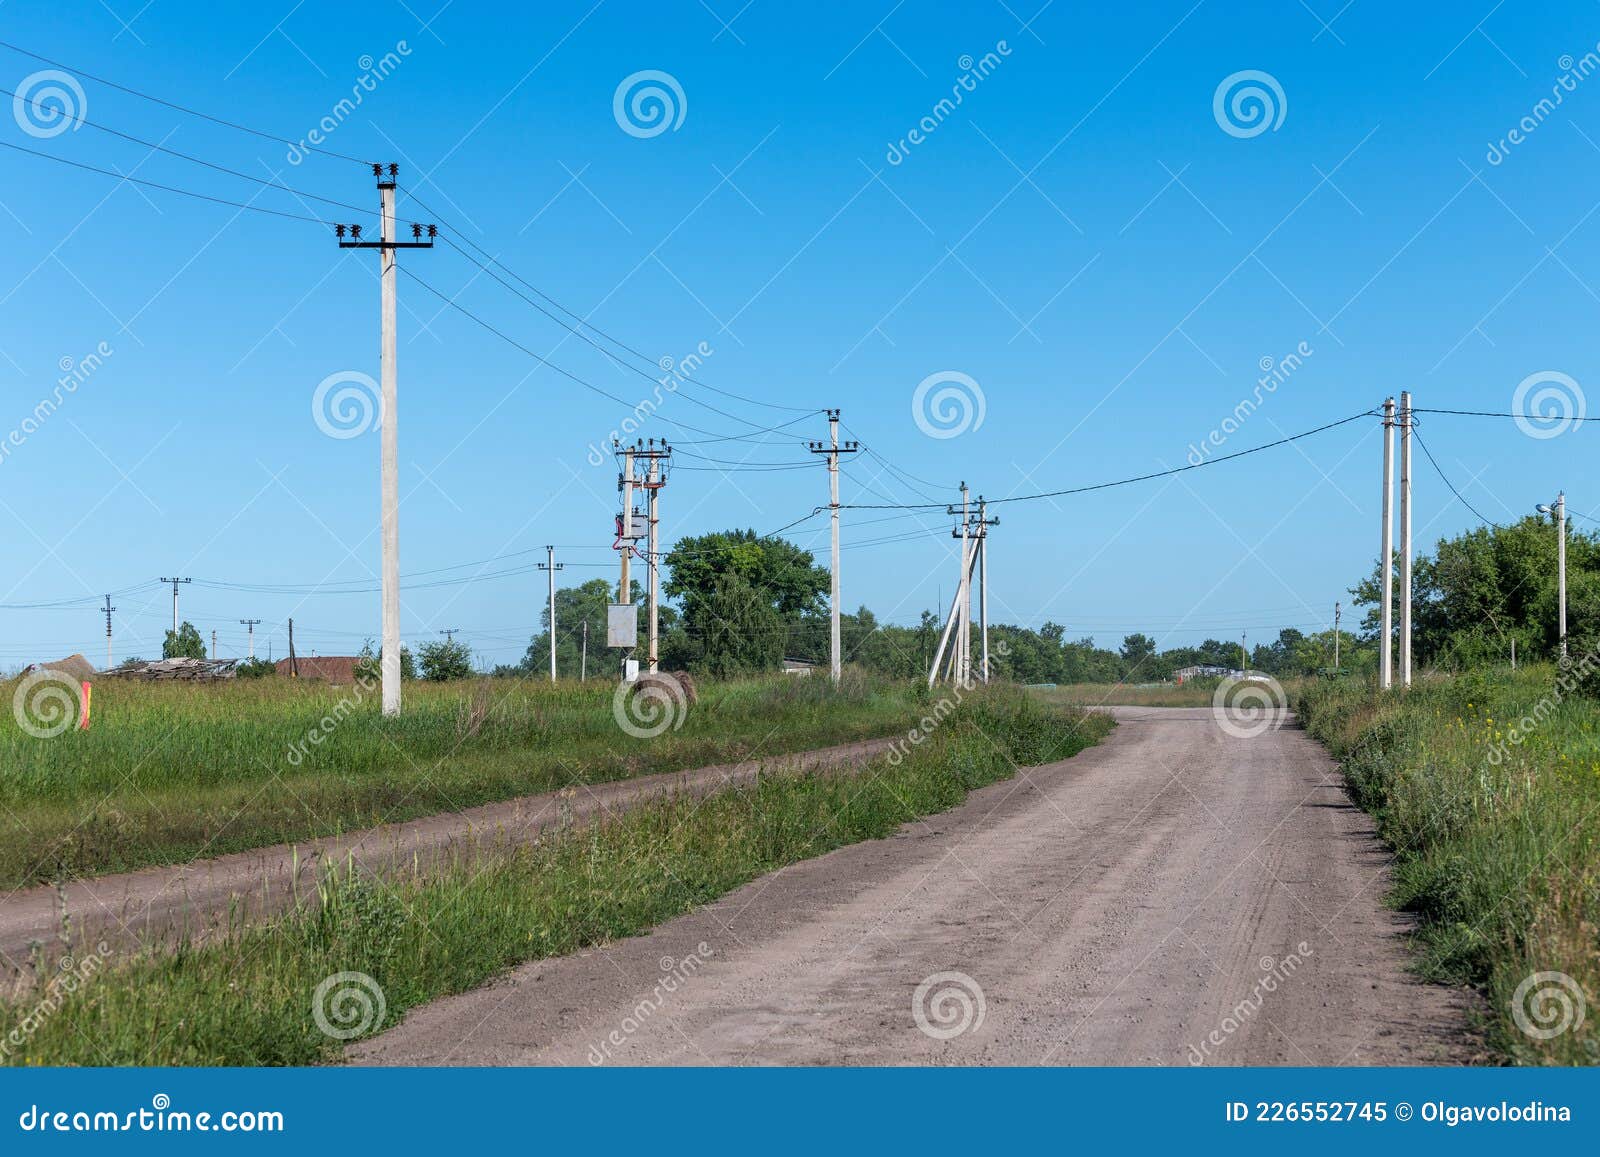 The Concrete Power Lines In The Village Stock Image Image Of Volt